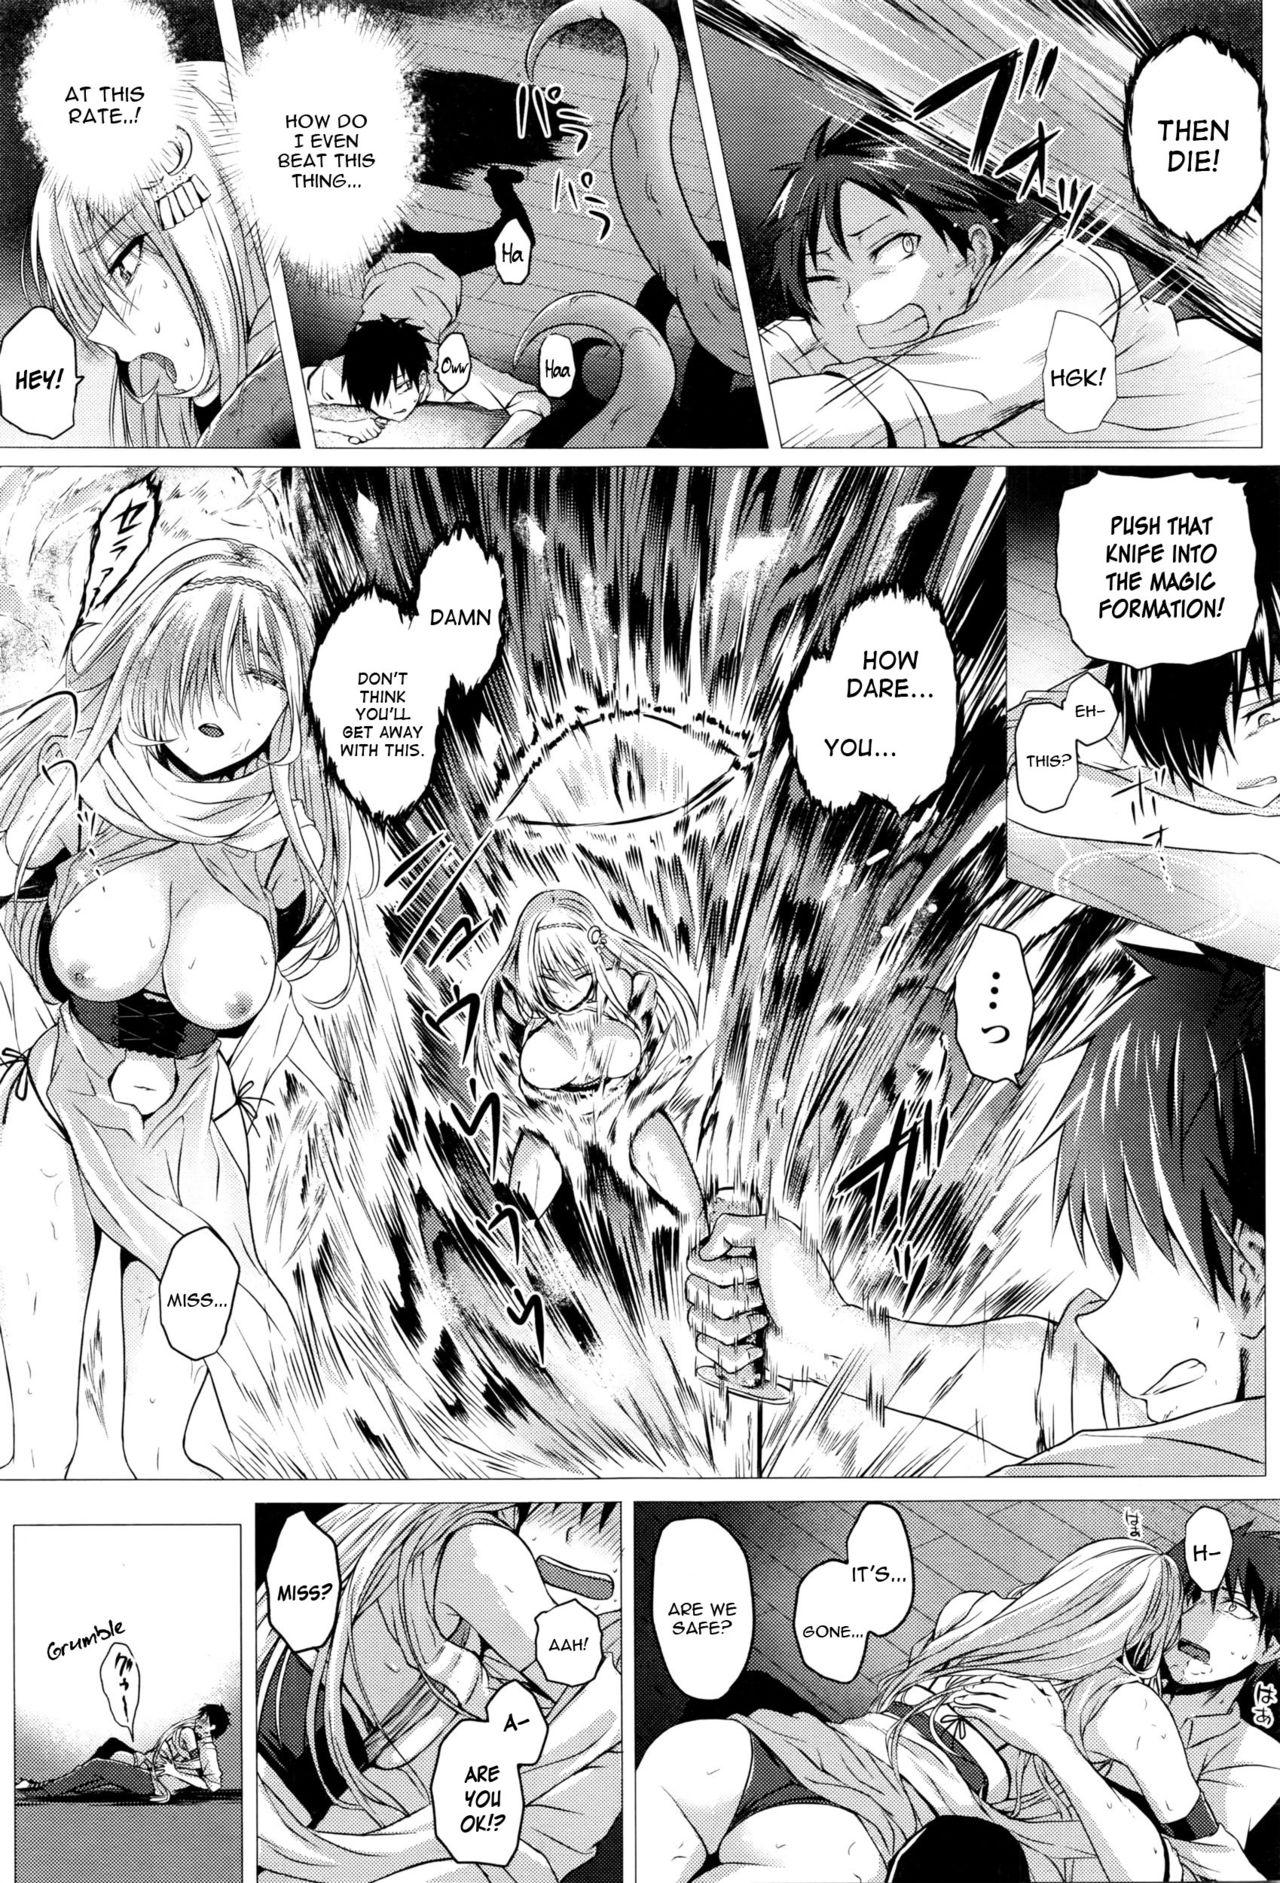  [Simon] Isekai no Mahoutsukai Ch. 1-2 | Mage From Another World Ch. 1-2 [English] [constantly] Smalltits - Page 5